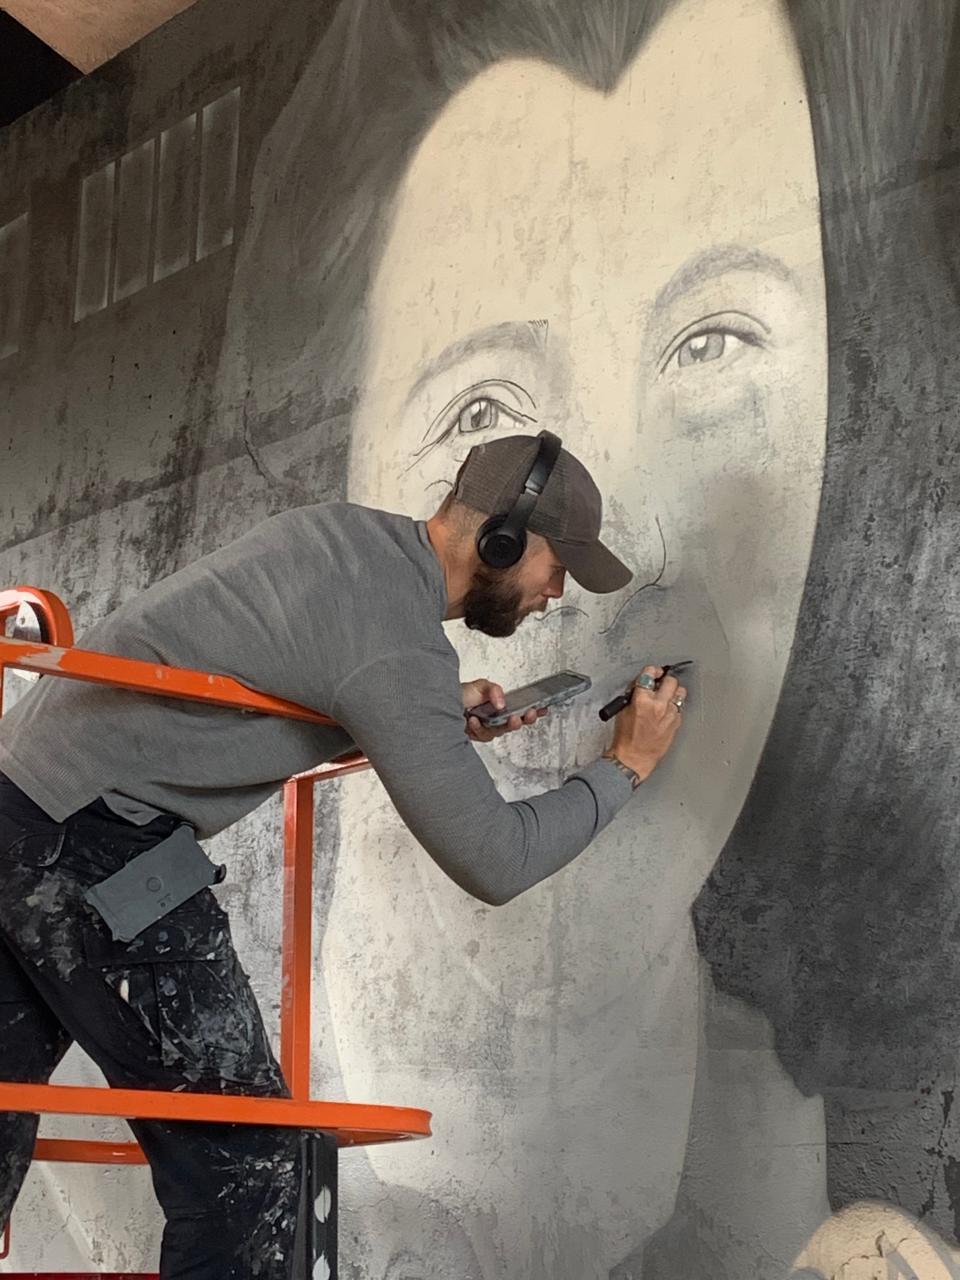 Artist Chris Bomengen continued his work Thursday on a mural beneath the railroad bridge on Timpany Boulevard between Hannaford supermarket and the Route 2 rotary in Gardner.